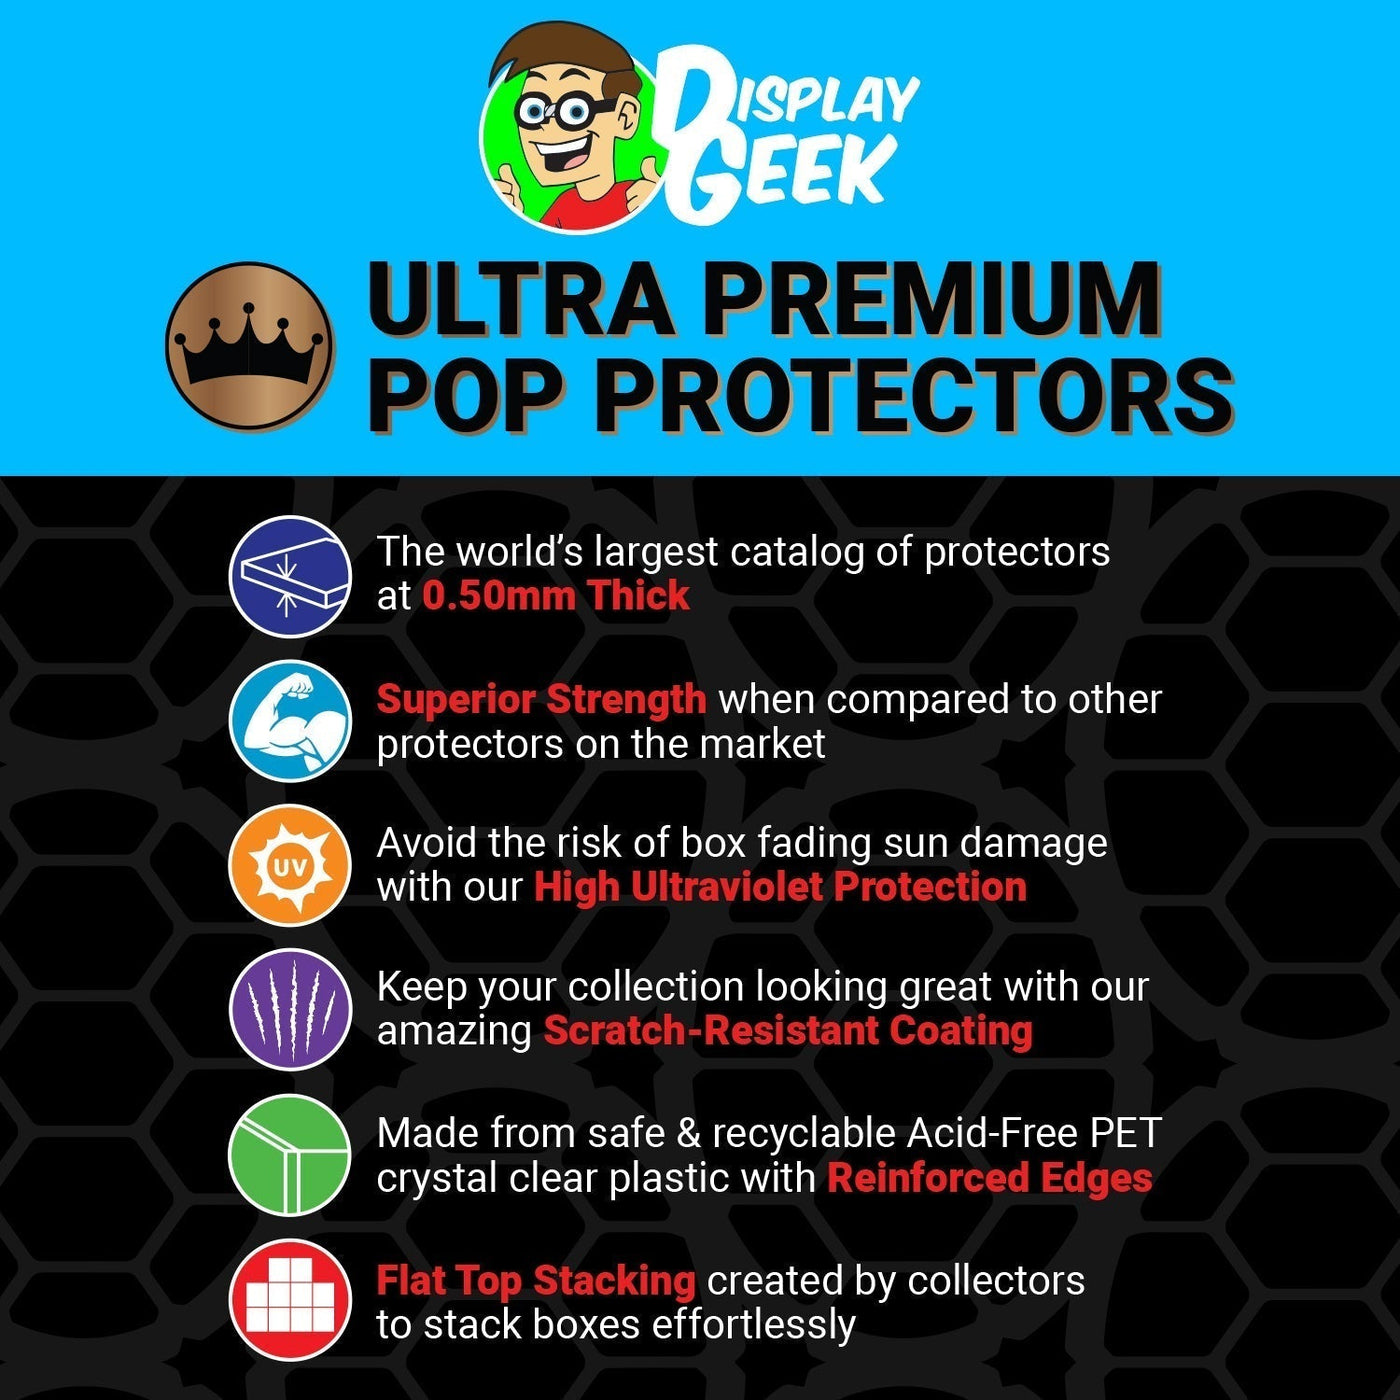 Pop Protector for 6 inch Drogon #46 Super Funko Pop on The Protector Guide App by Display Geek